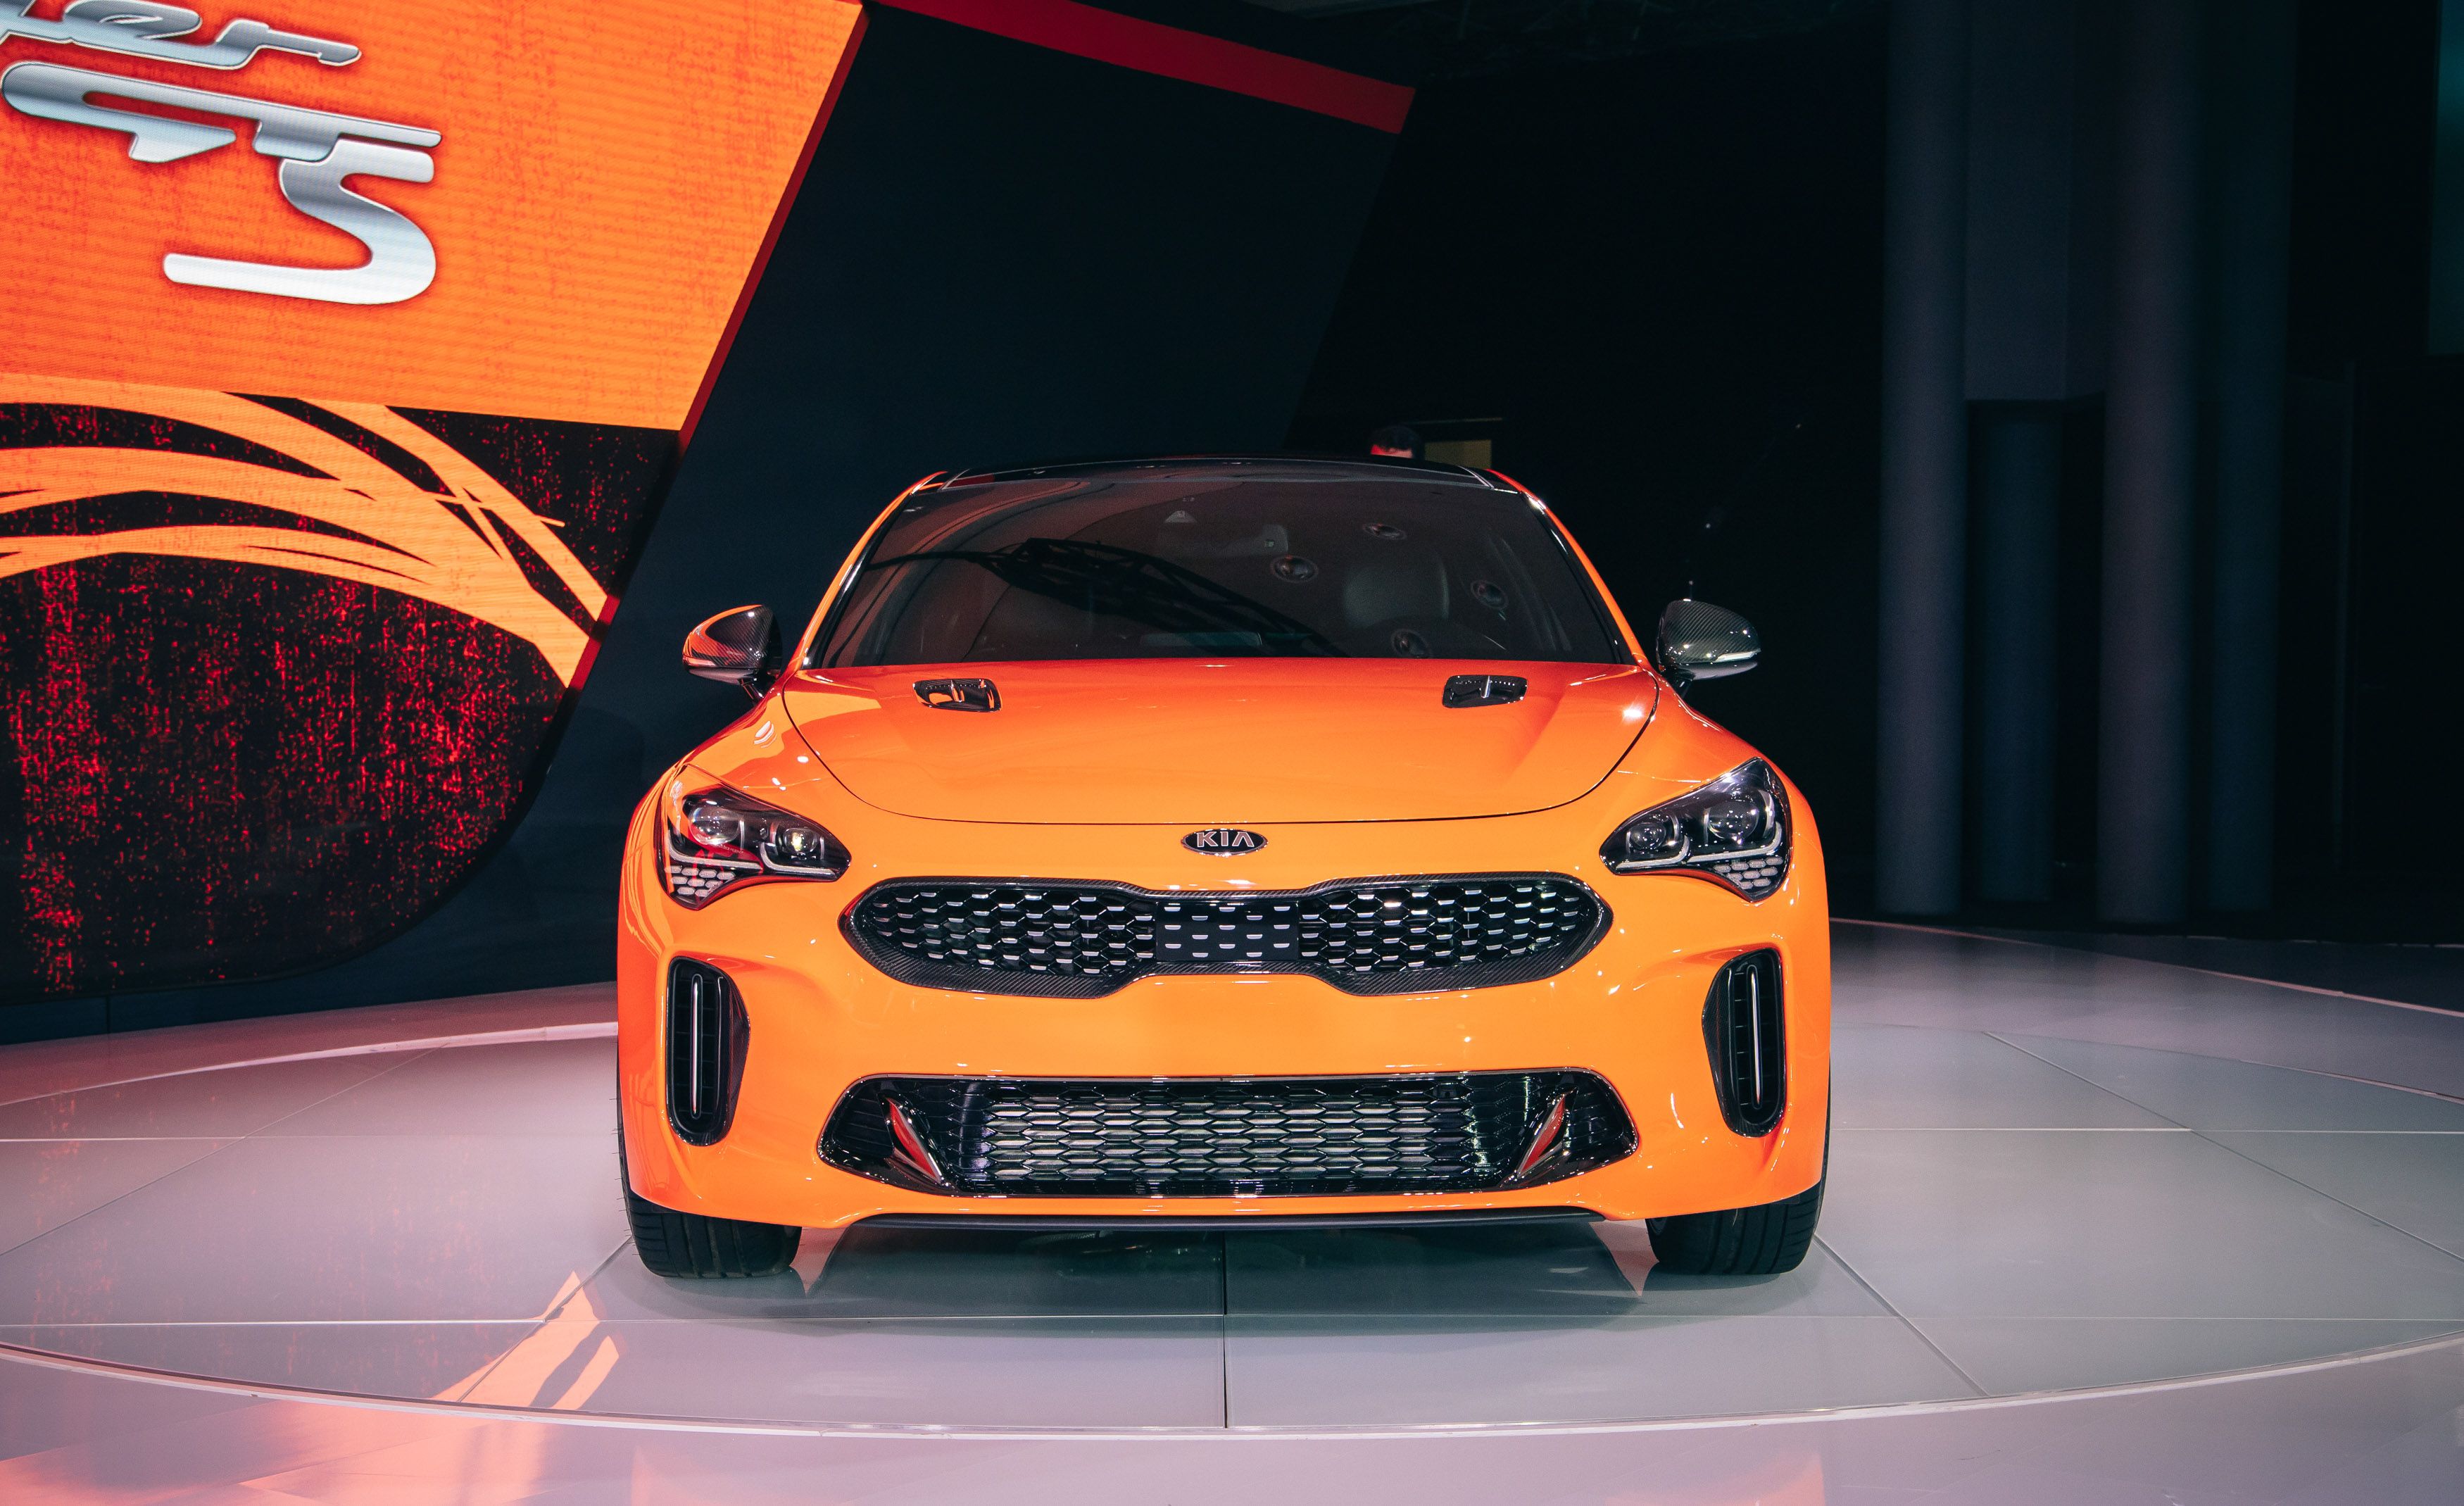 2020 Kia Stinger GTS Is an Orange Special Edition, with Drift Mode